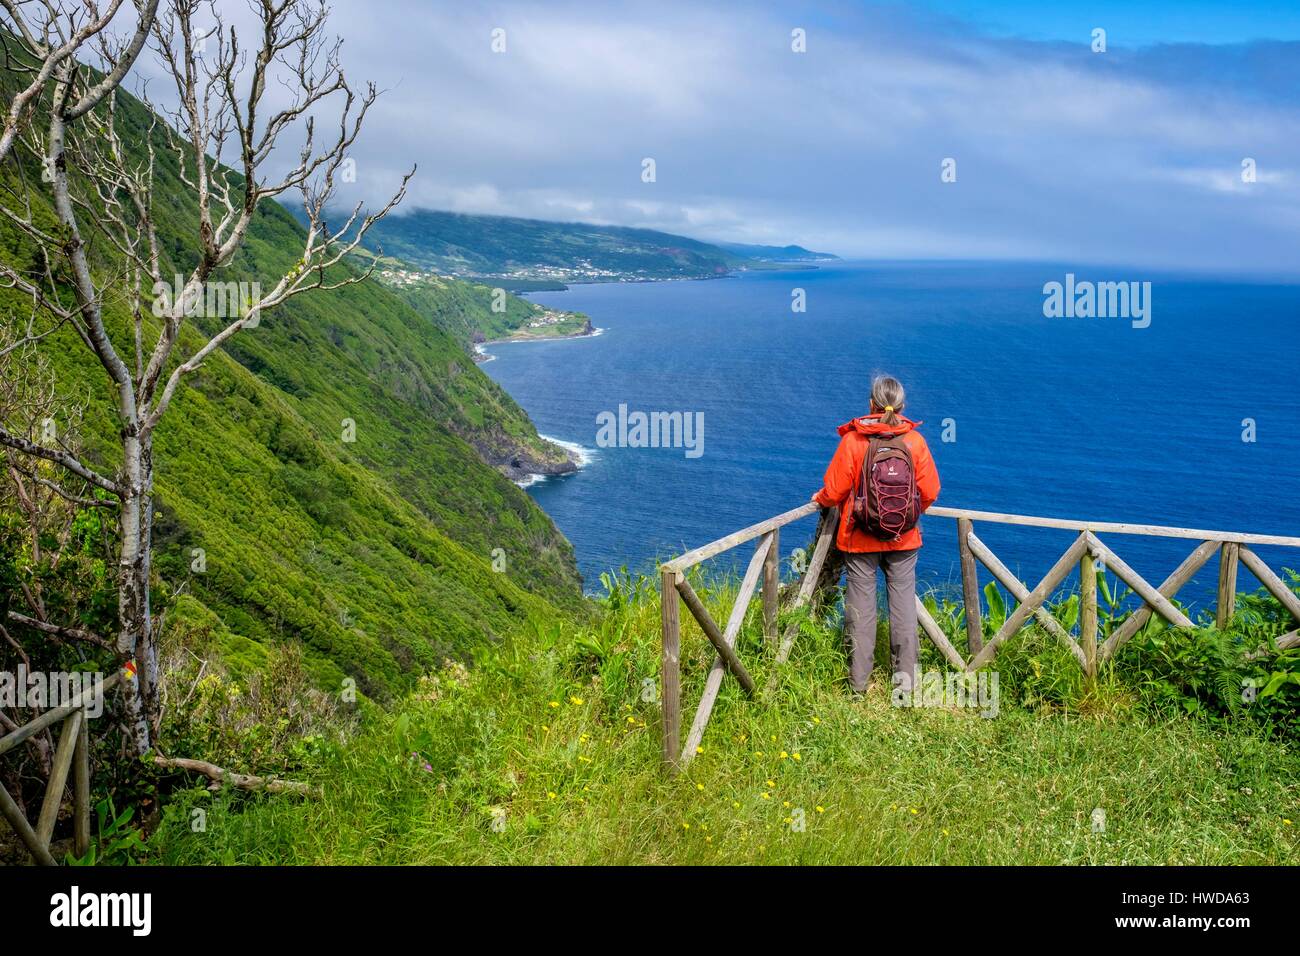 Portugal, Azores archipelago, Pico island, view other the northern coast from Alto dos Cedros viewpoint Stock Photo